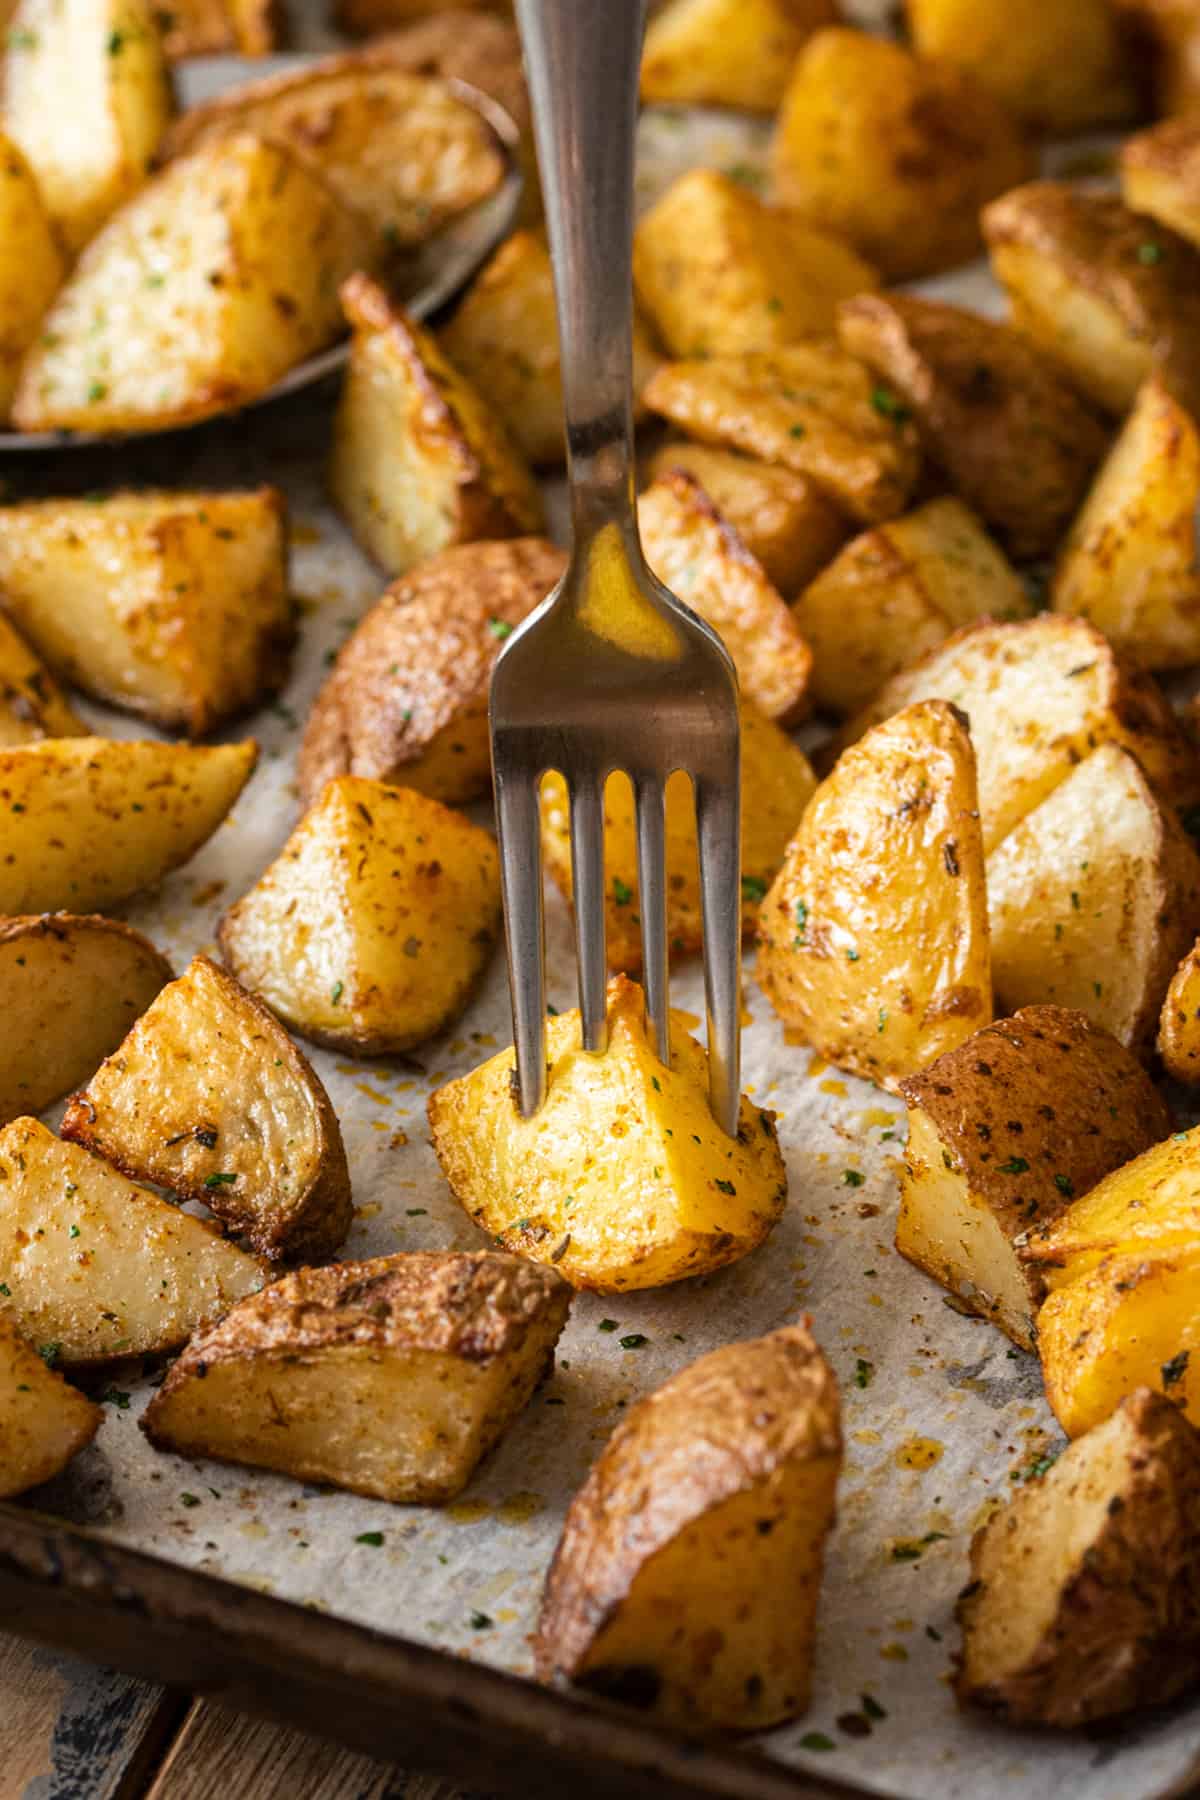 Seasoned oven roasted potatoes baked golden brown on a sheet pan with a fork through one of the wedges.